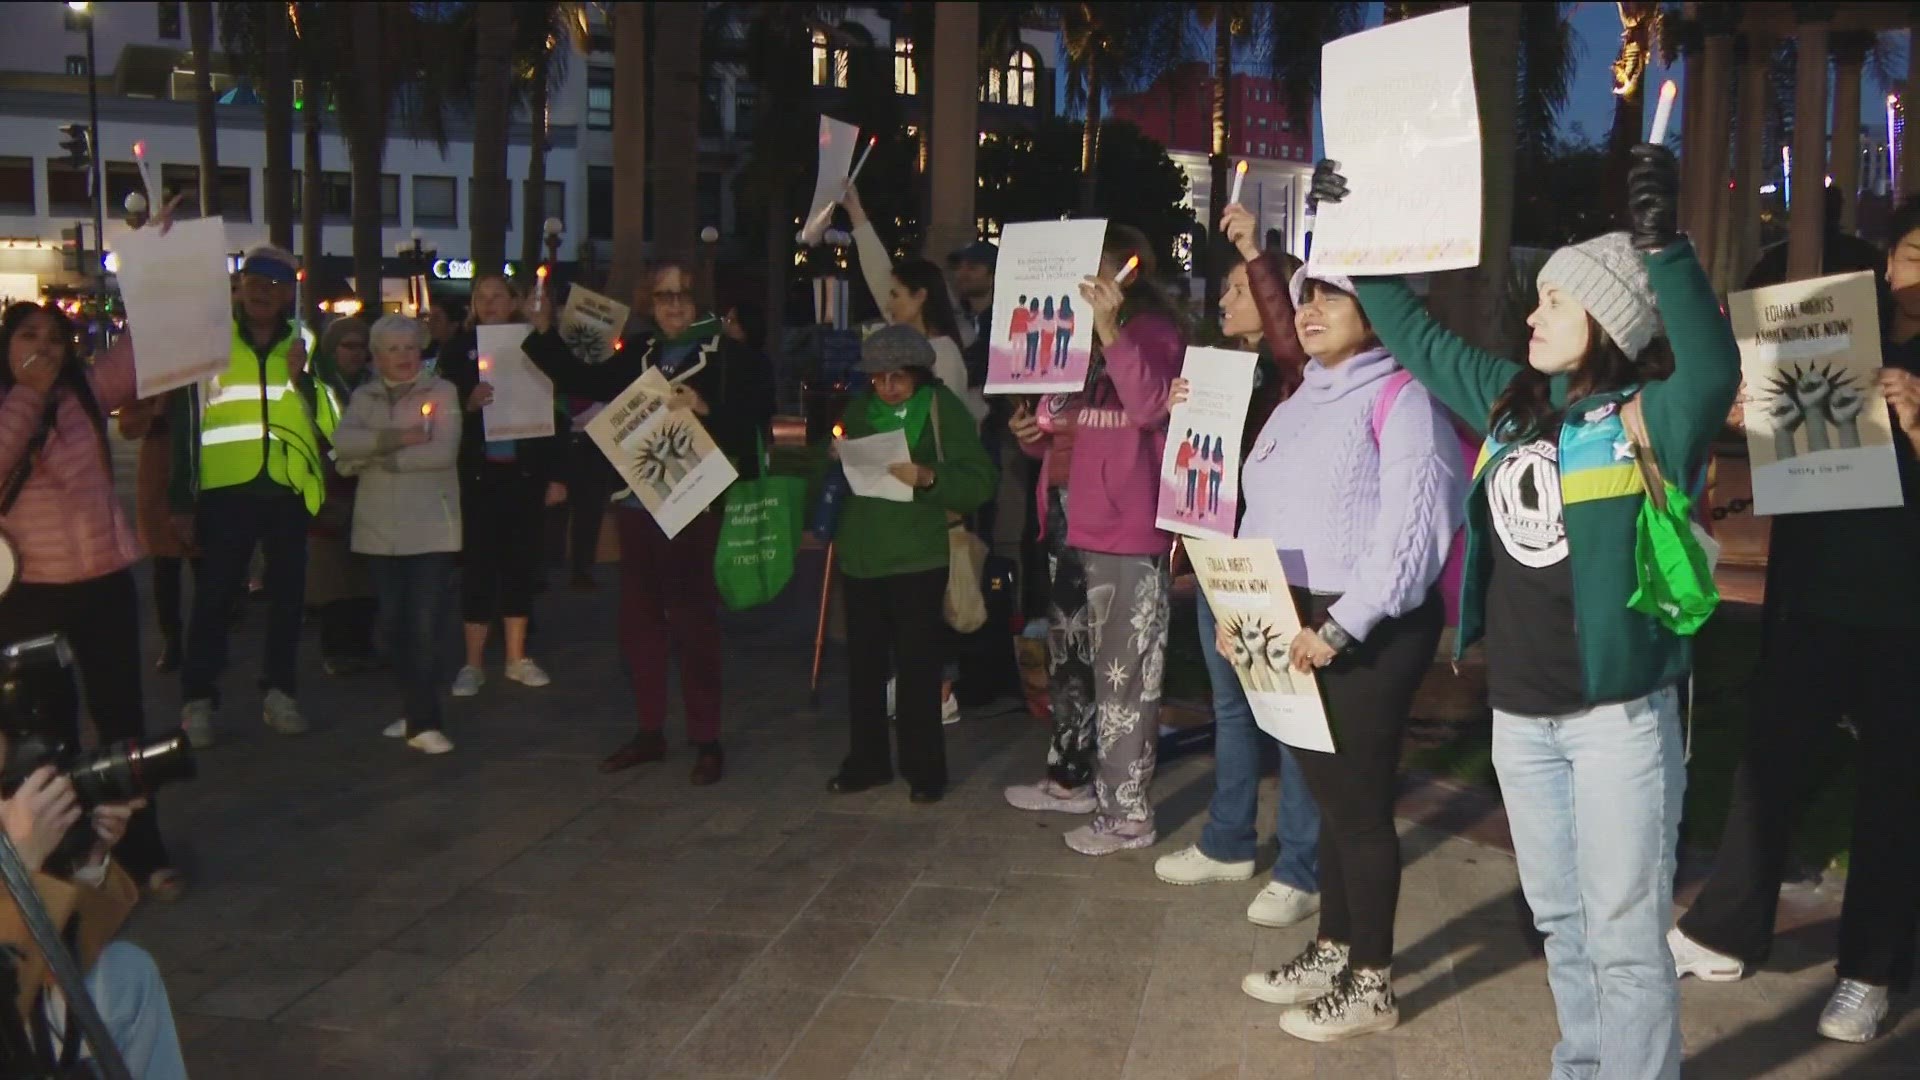 San Diego celebrated in many ways, including a coalition of feminist groups and allies, who marched through Downtown San Diego.